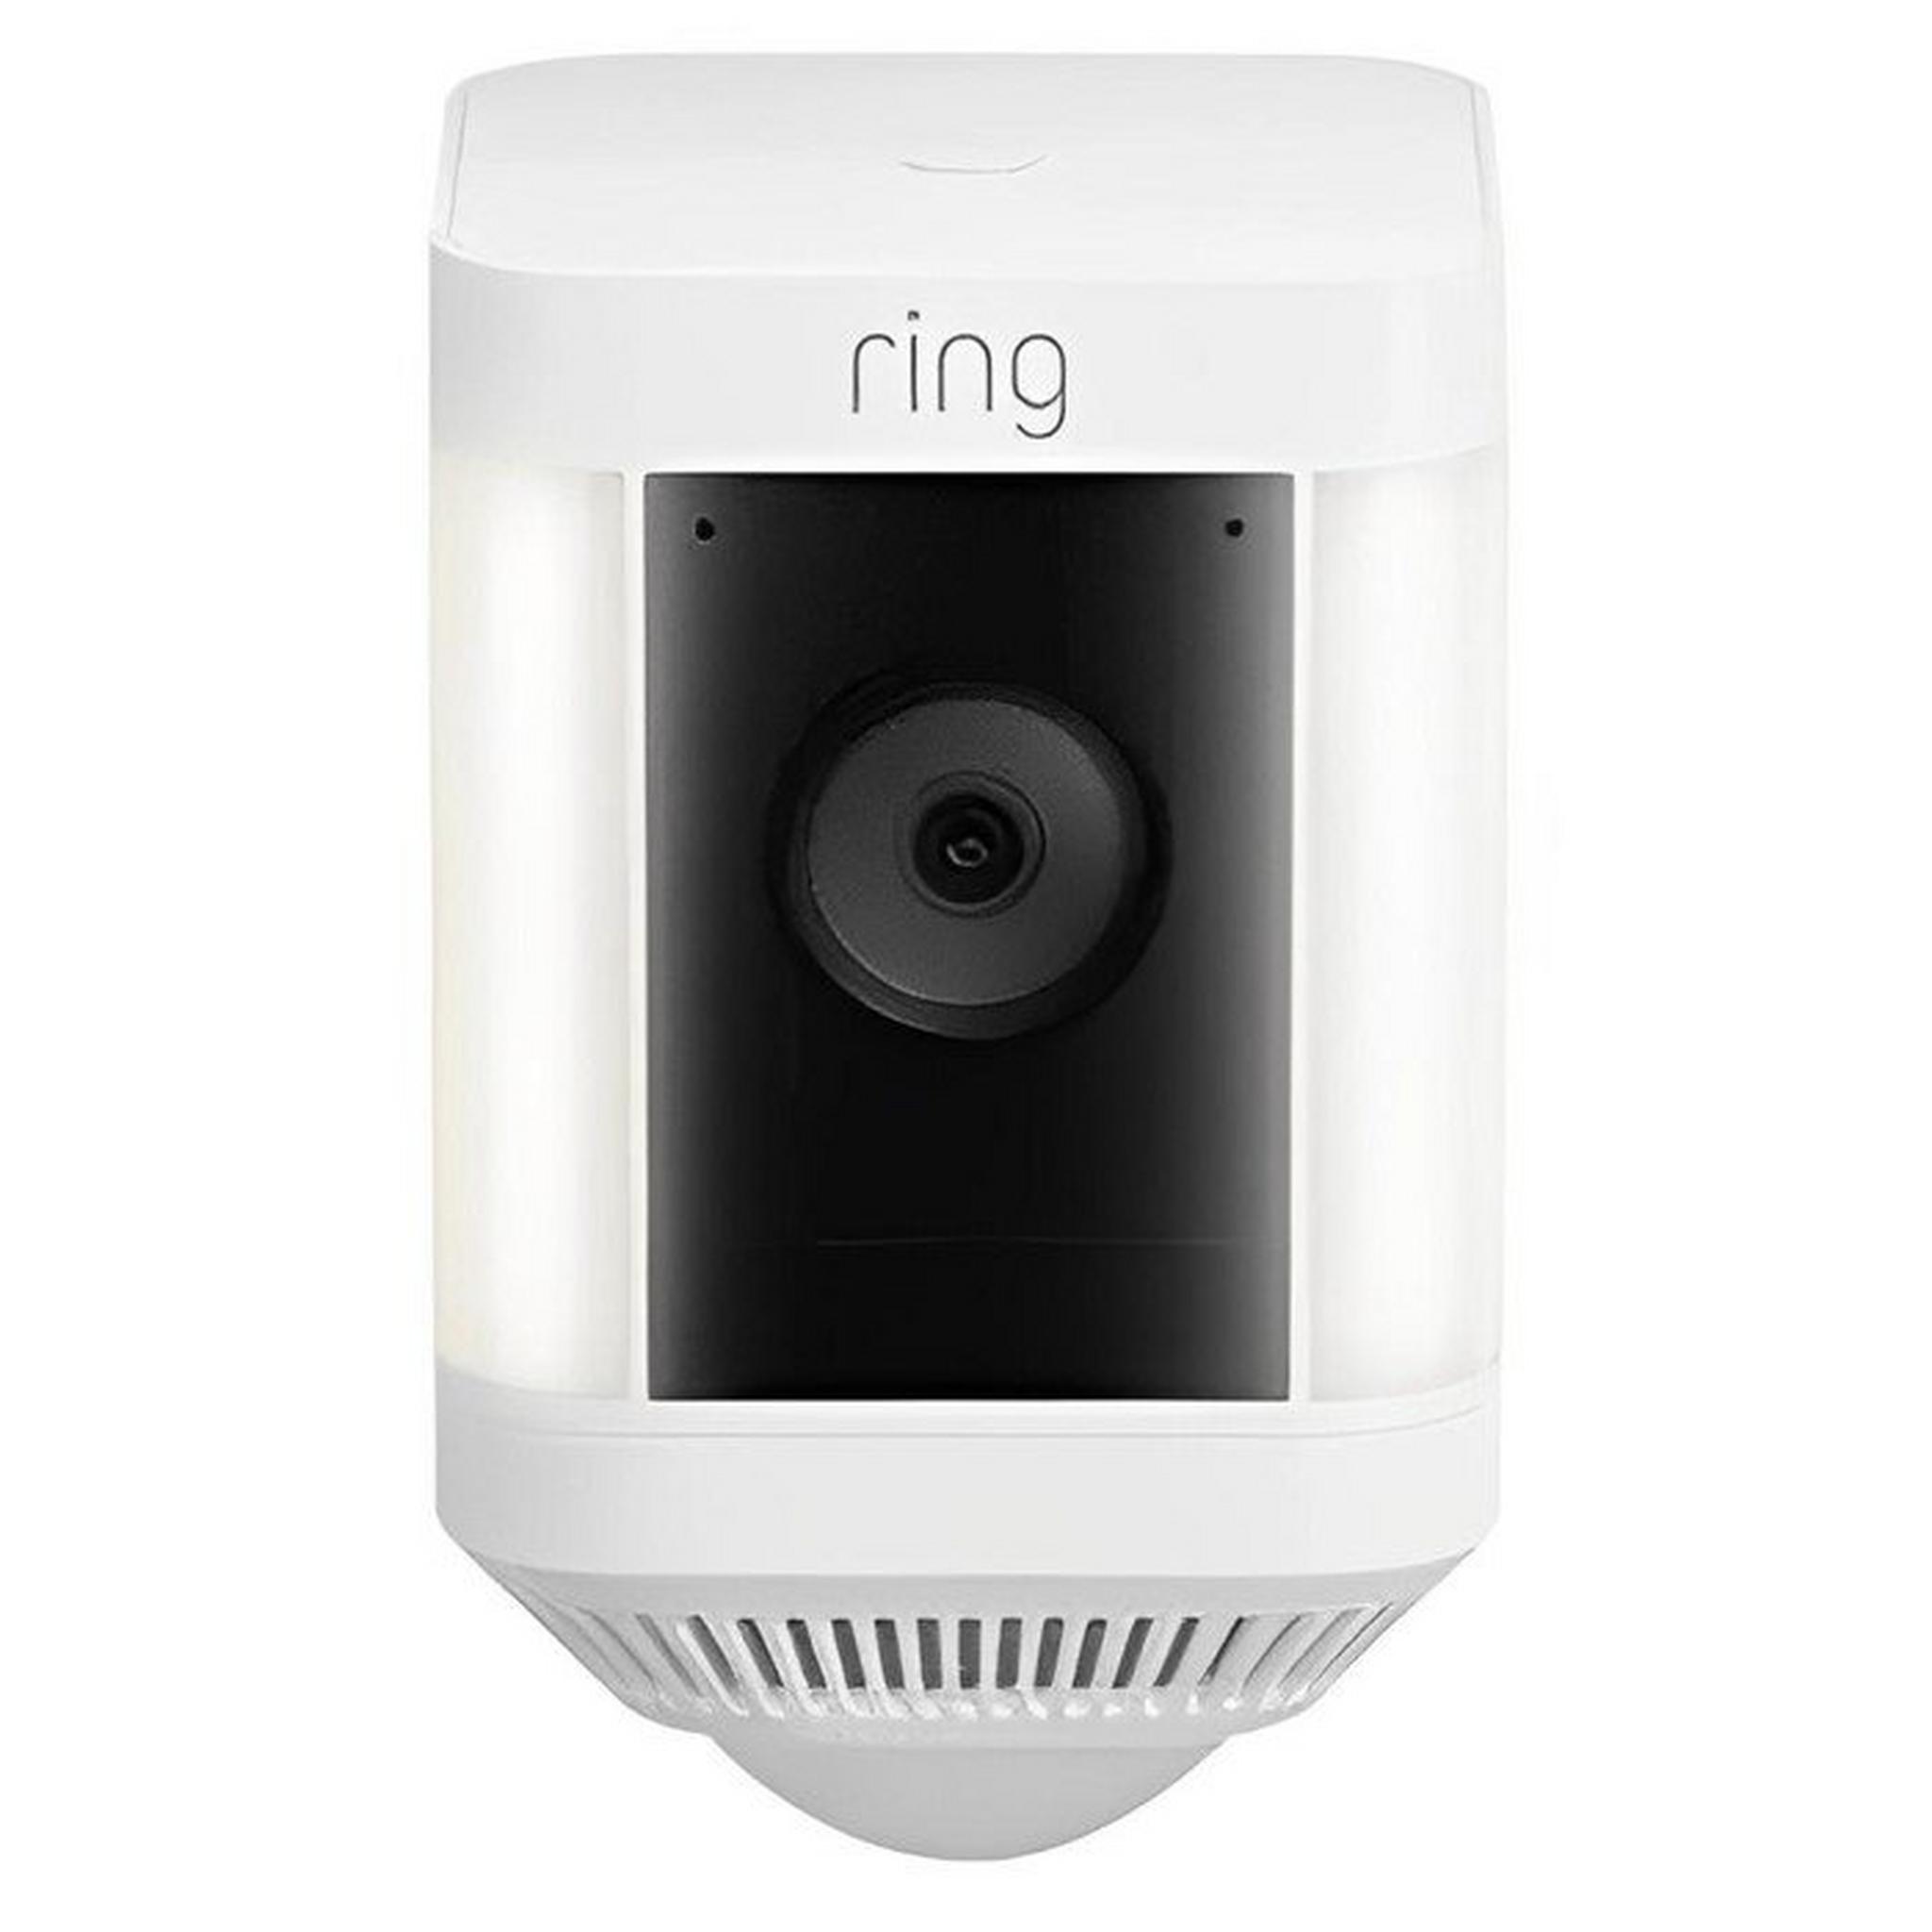 Ring Spotlight Cam Plus with Battery In Security Camera, with Built -in Security Siren, +2 LED Spotlights, 8SB1S2-WME0 - White